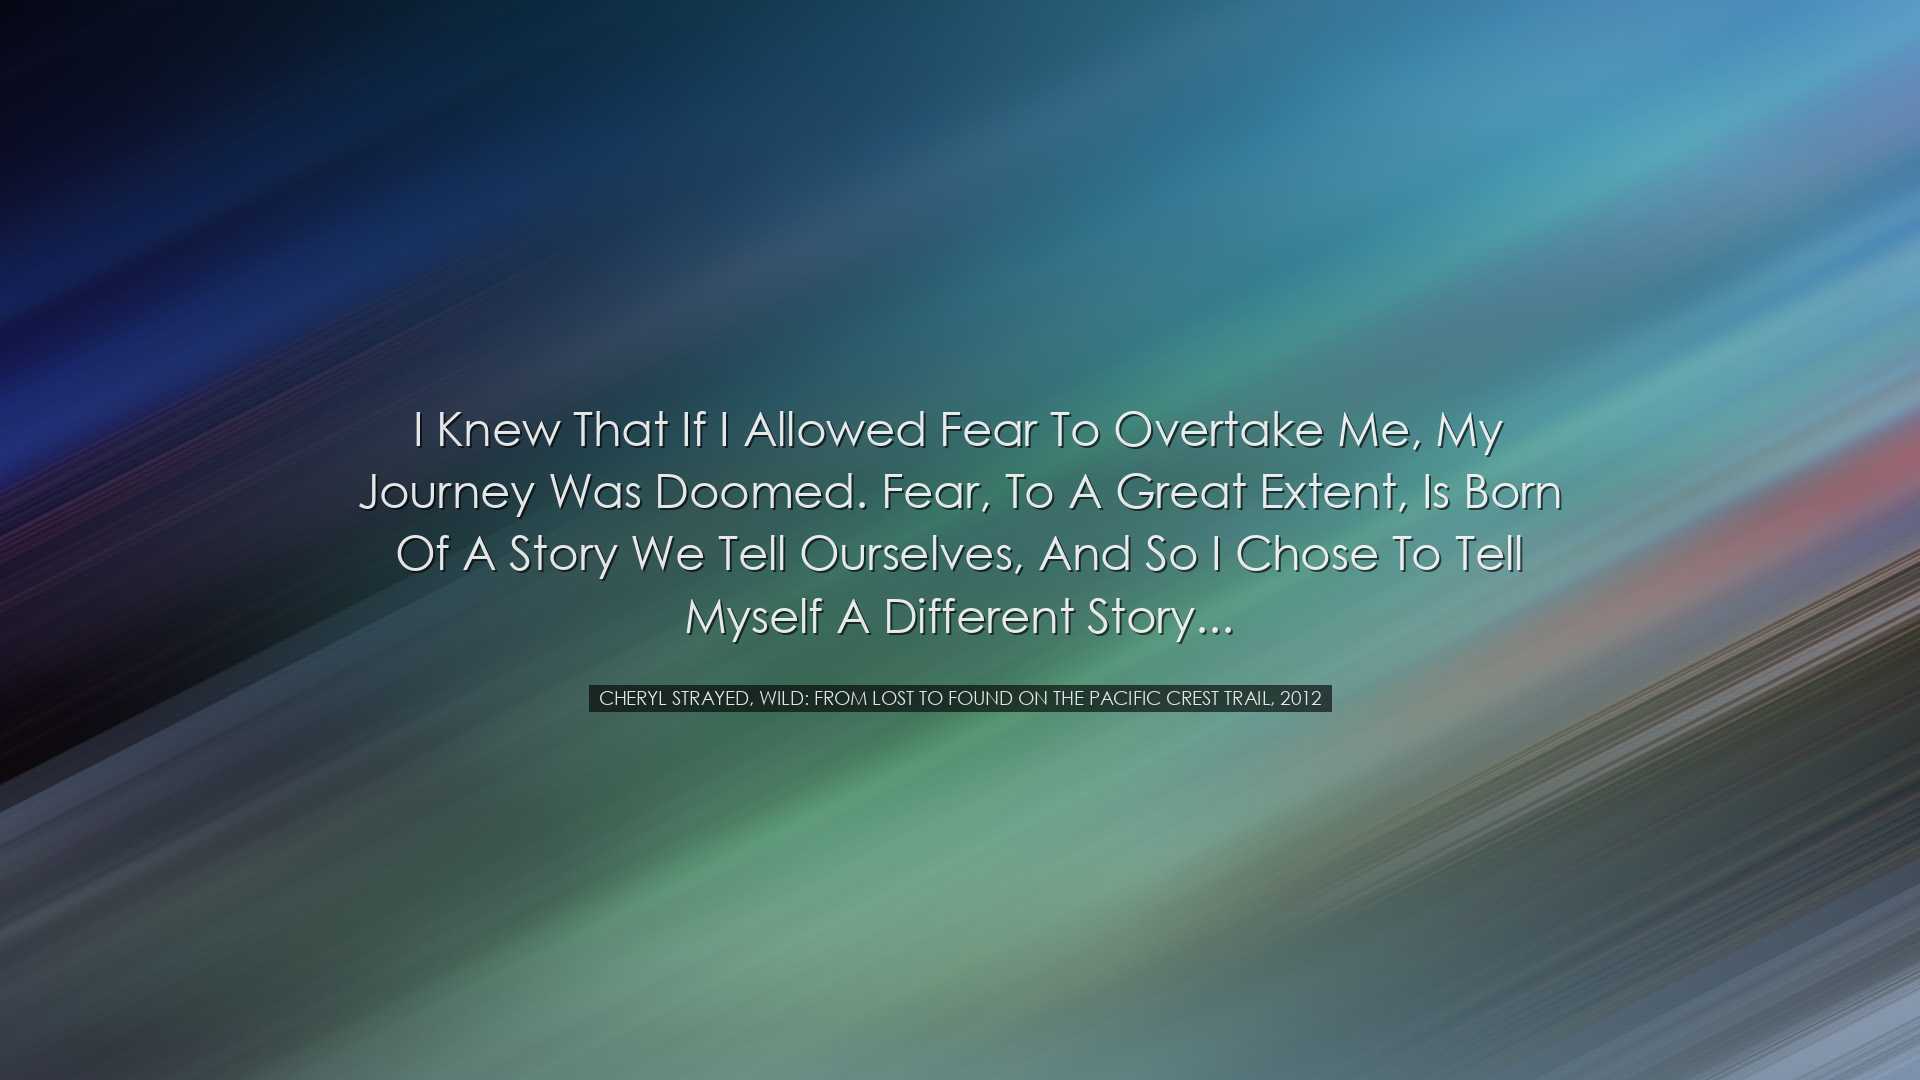 I knew that if I allowed fear to overtake me, my journey was doome